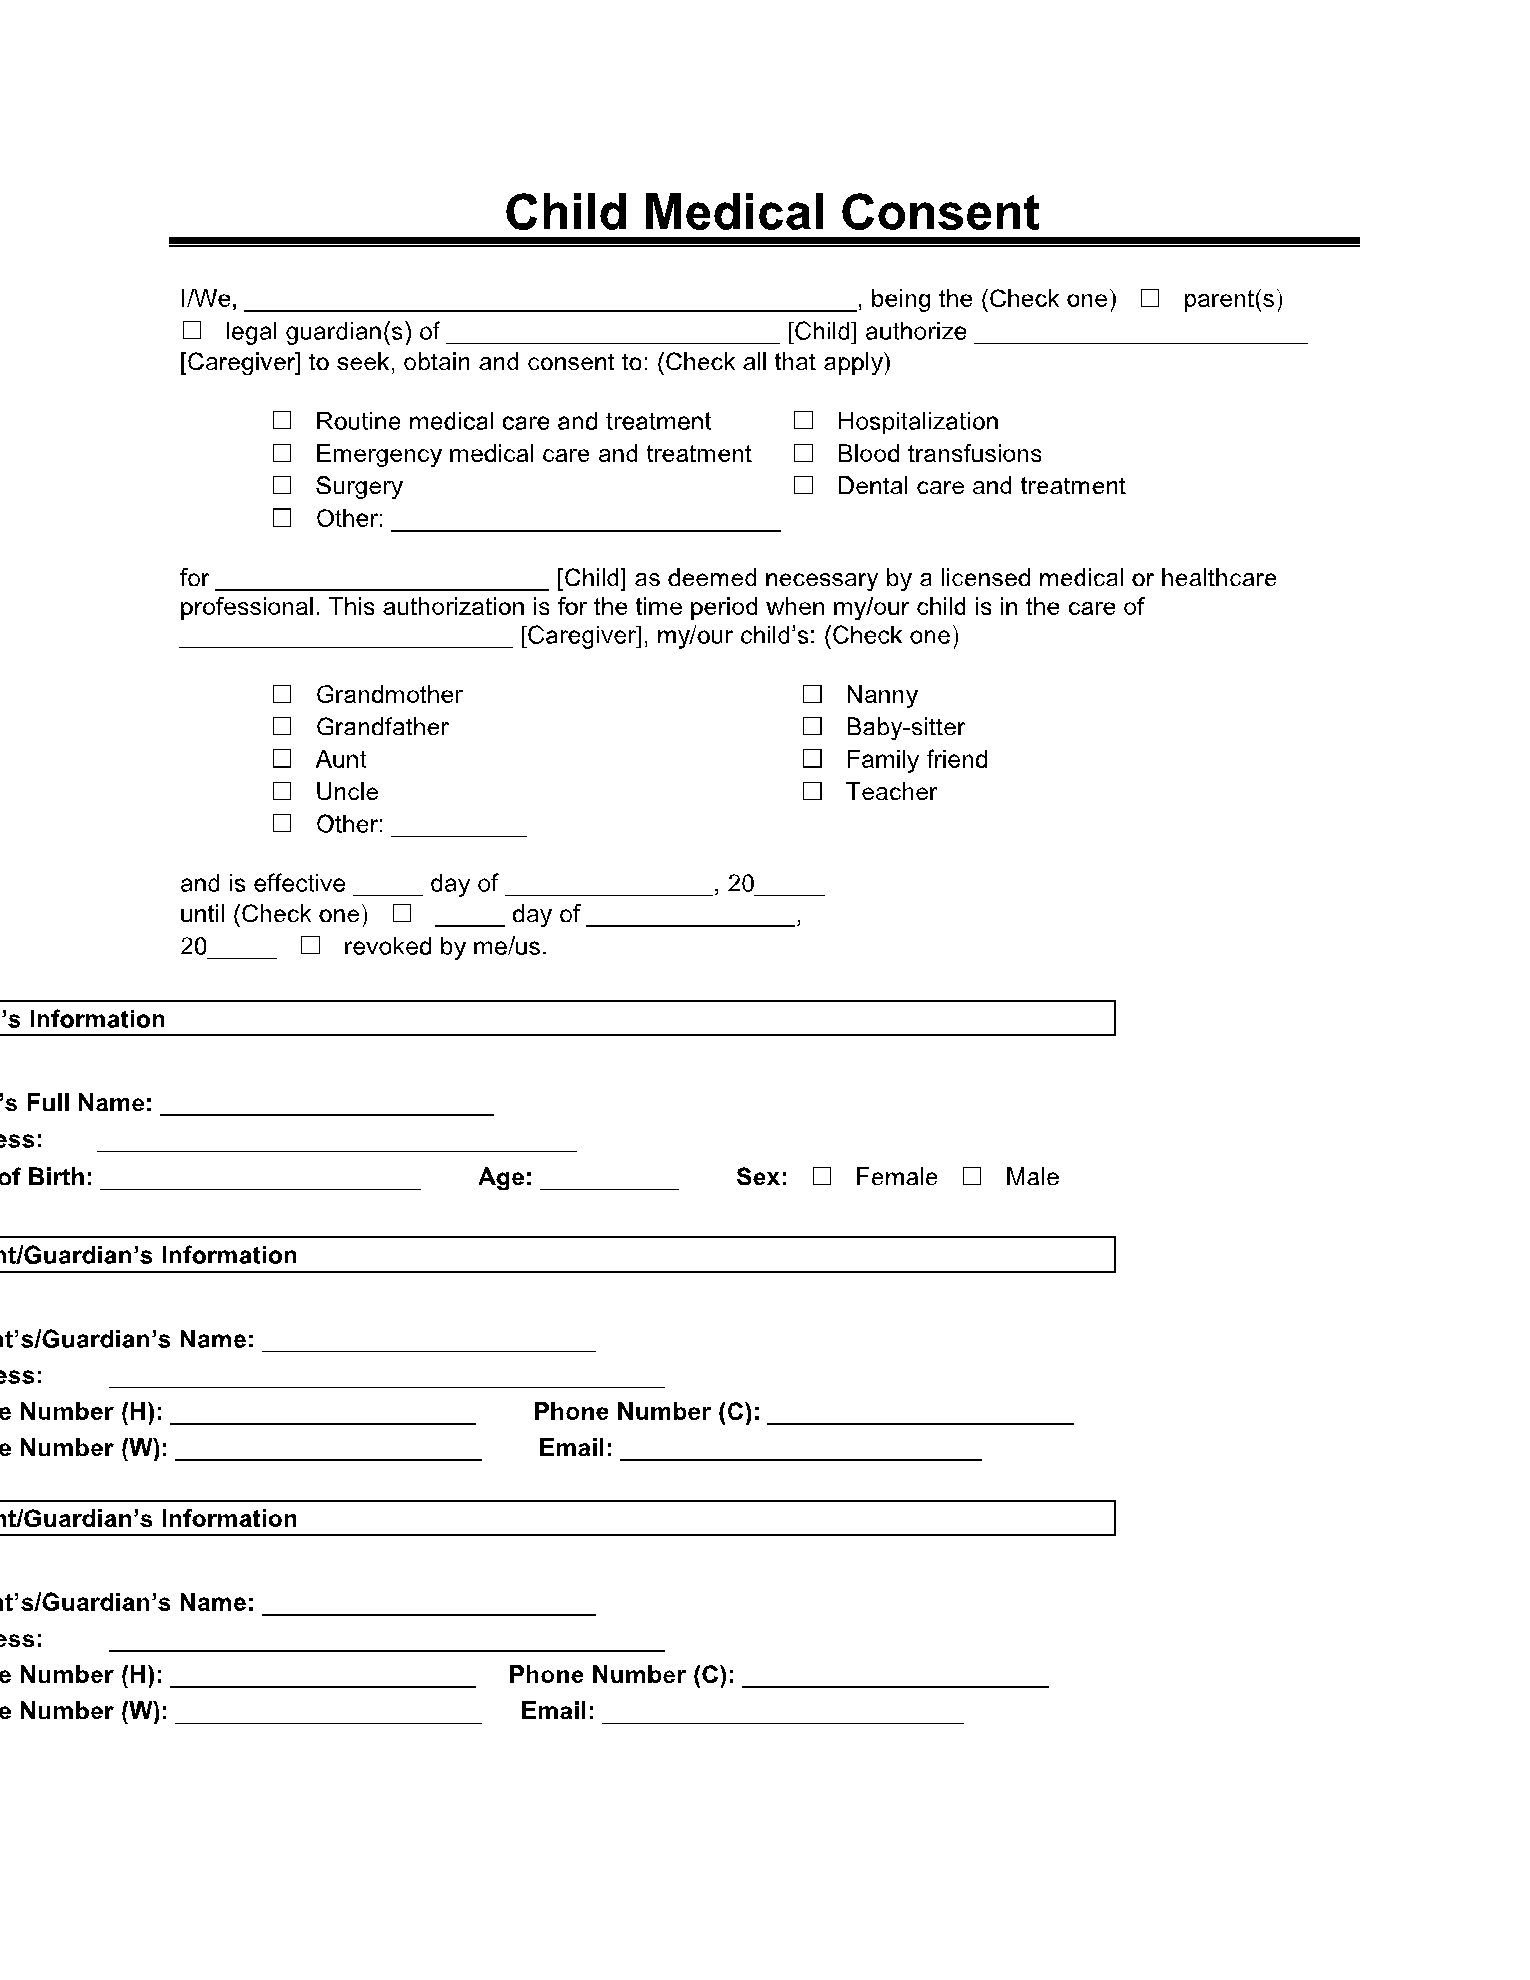 Child Medical Consent Form Free Sample CocoDoc